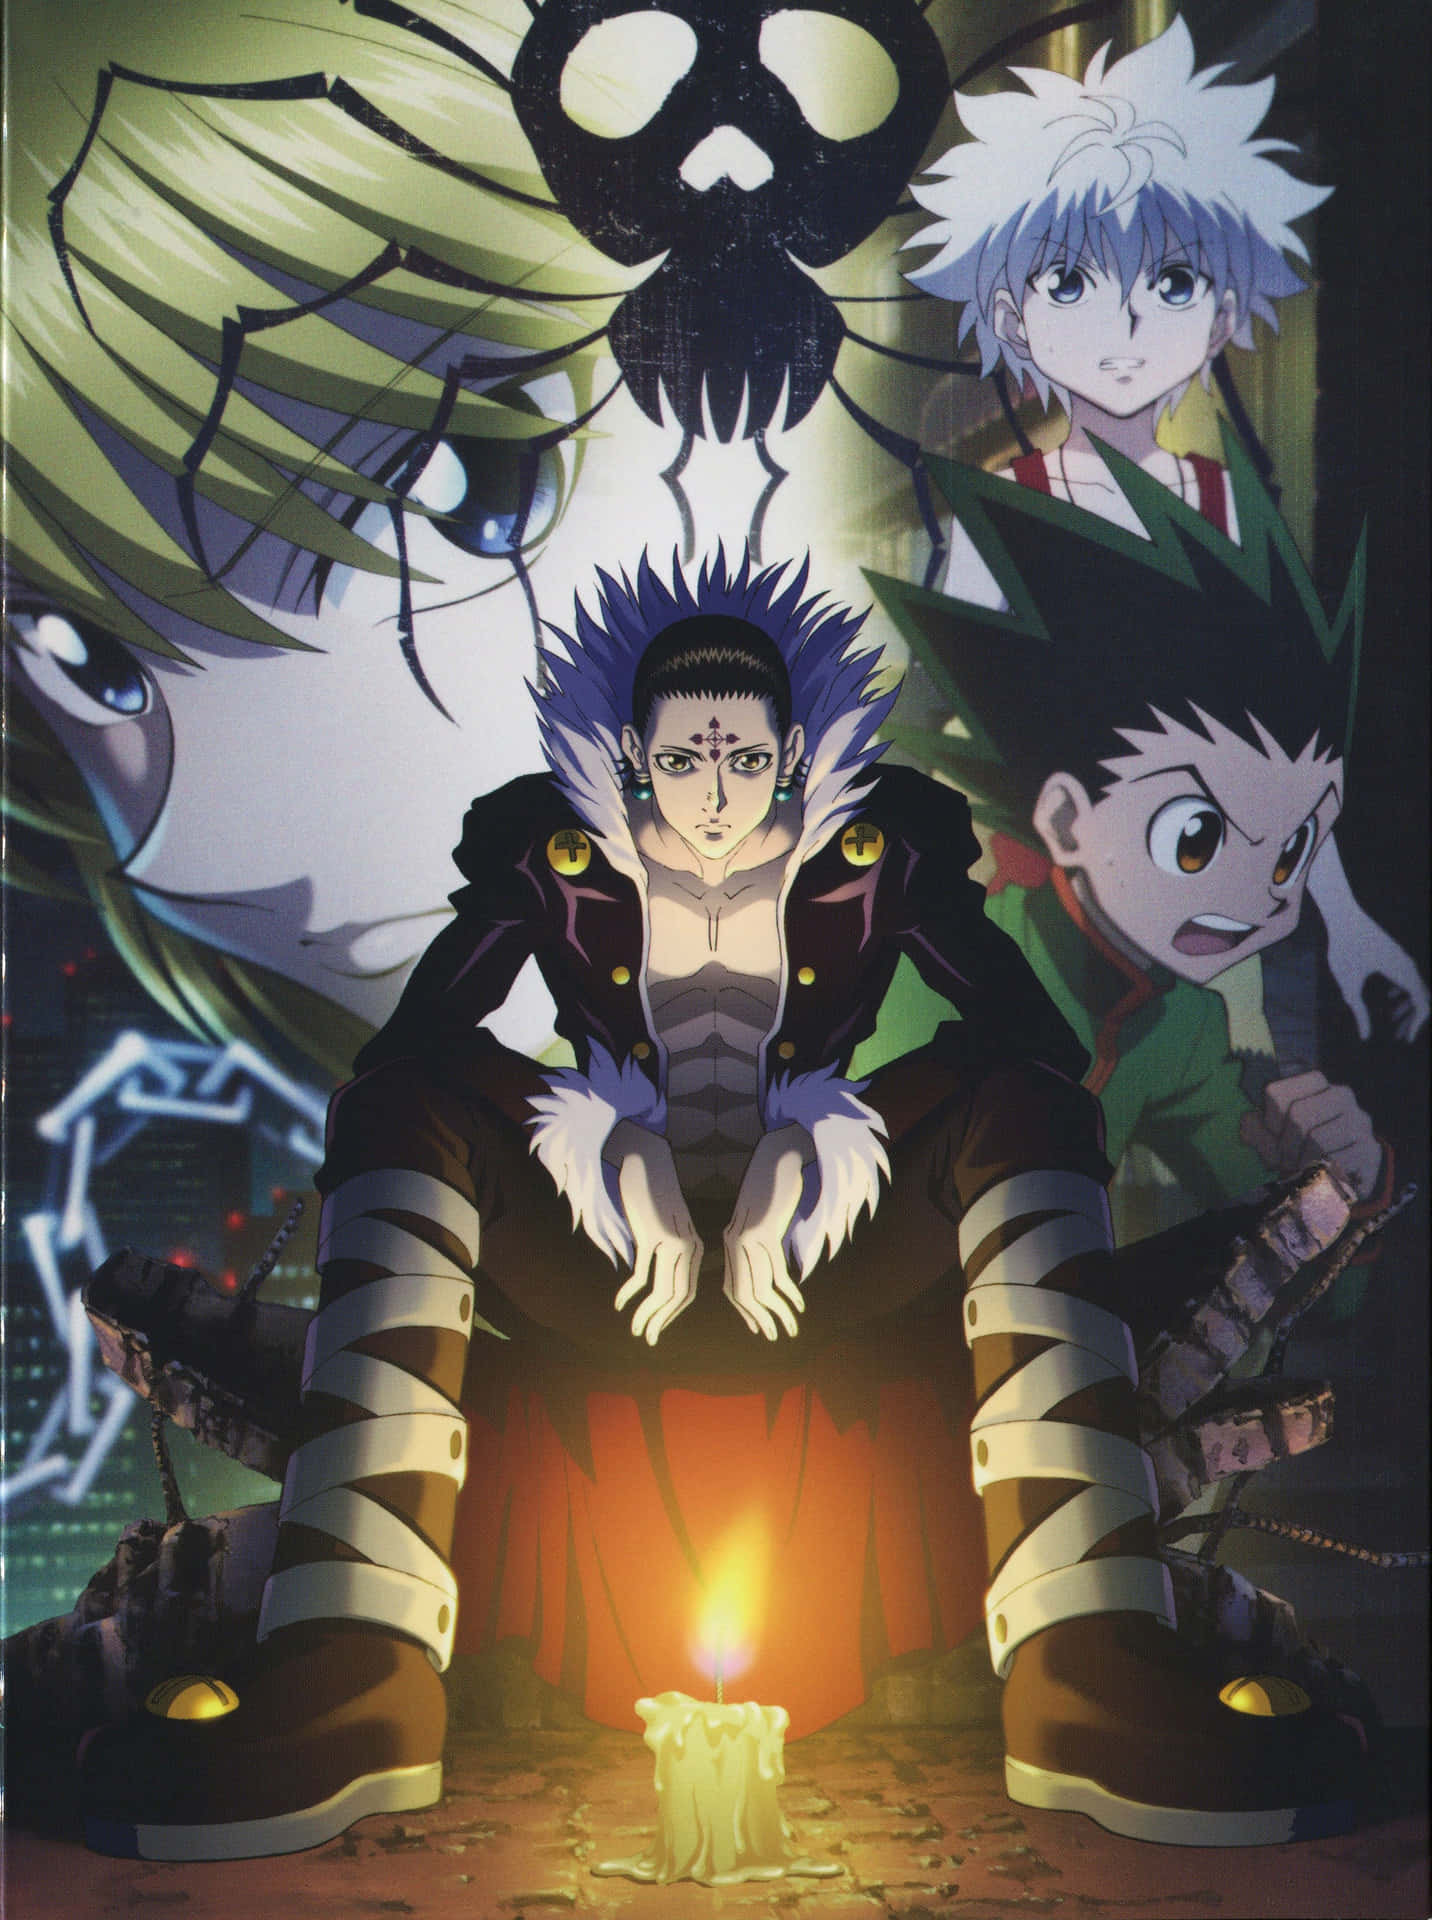 Chrollo Lucilfer in His Iconic Phantom Troupe Outfit Wallpaper